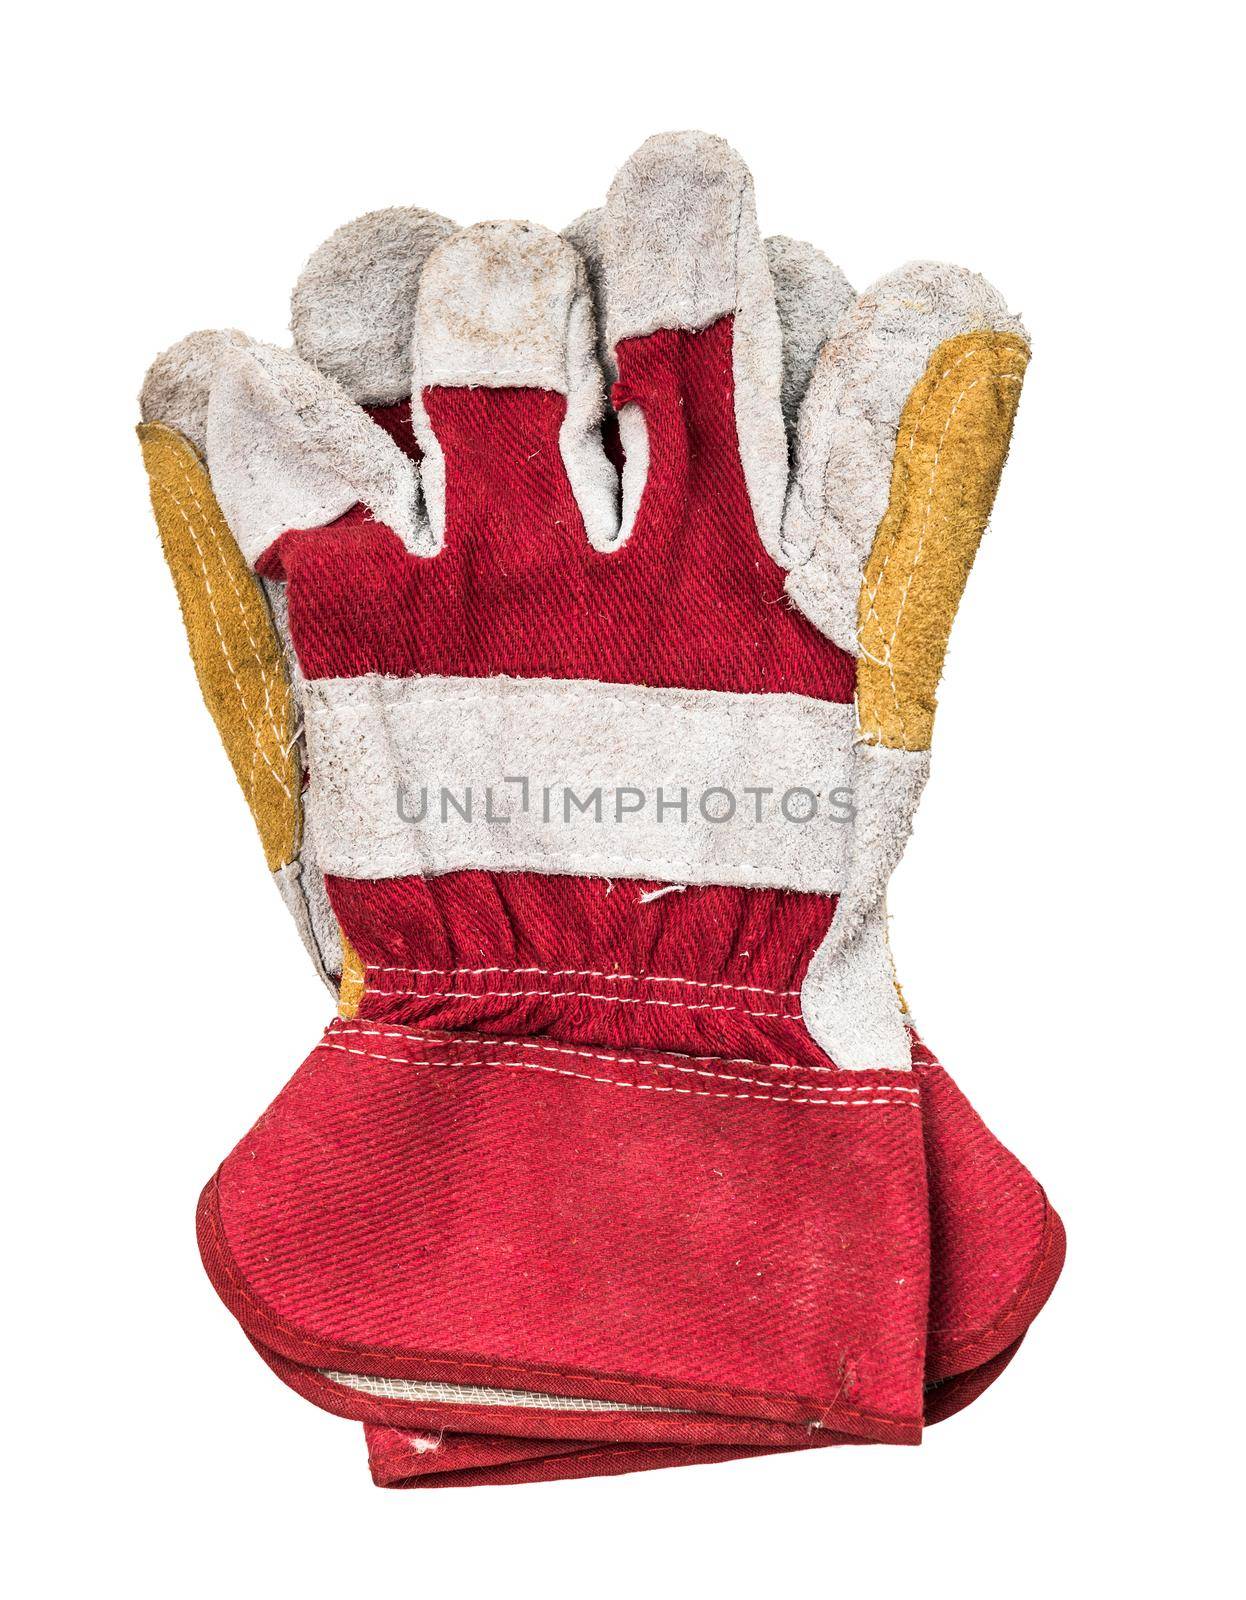 Genuine white leather and red fabric work gloves over white background